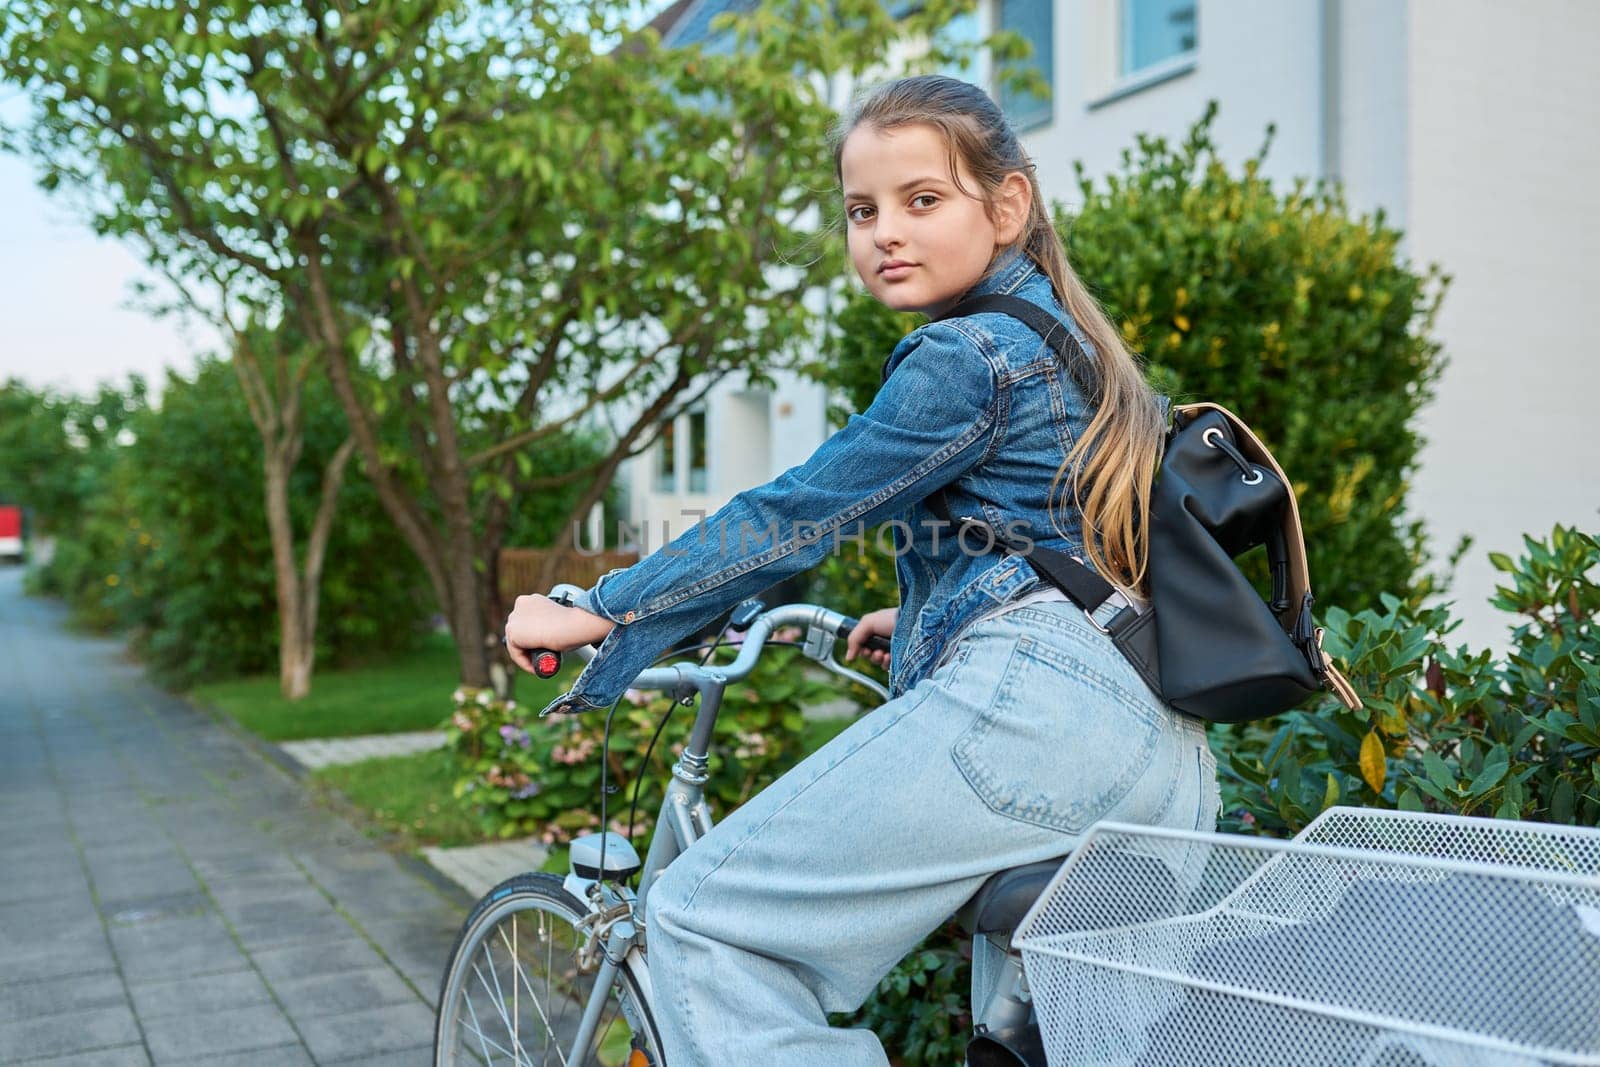 Back to school. Girl child 10, 11 years old with backpack on bicycle on street near house, posing looking at camera. Schoolgirl cycling to school, lifestyle, childhood concept